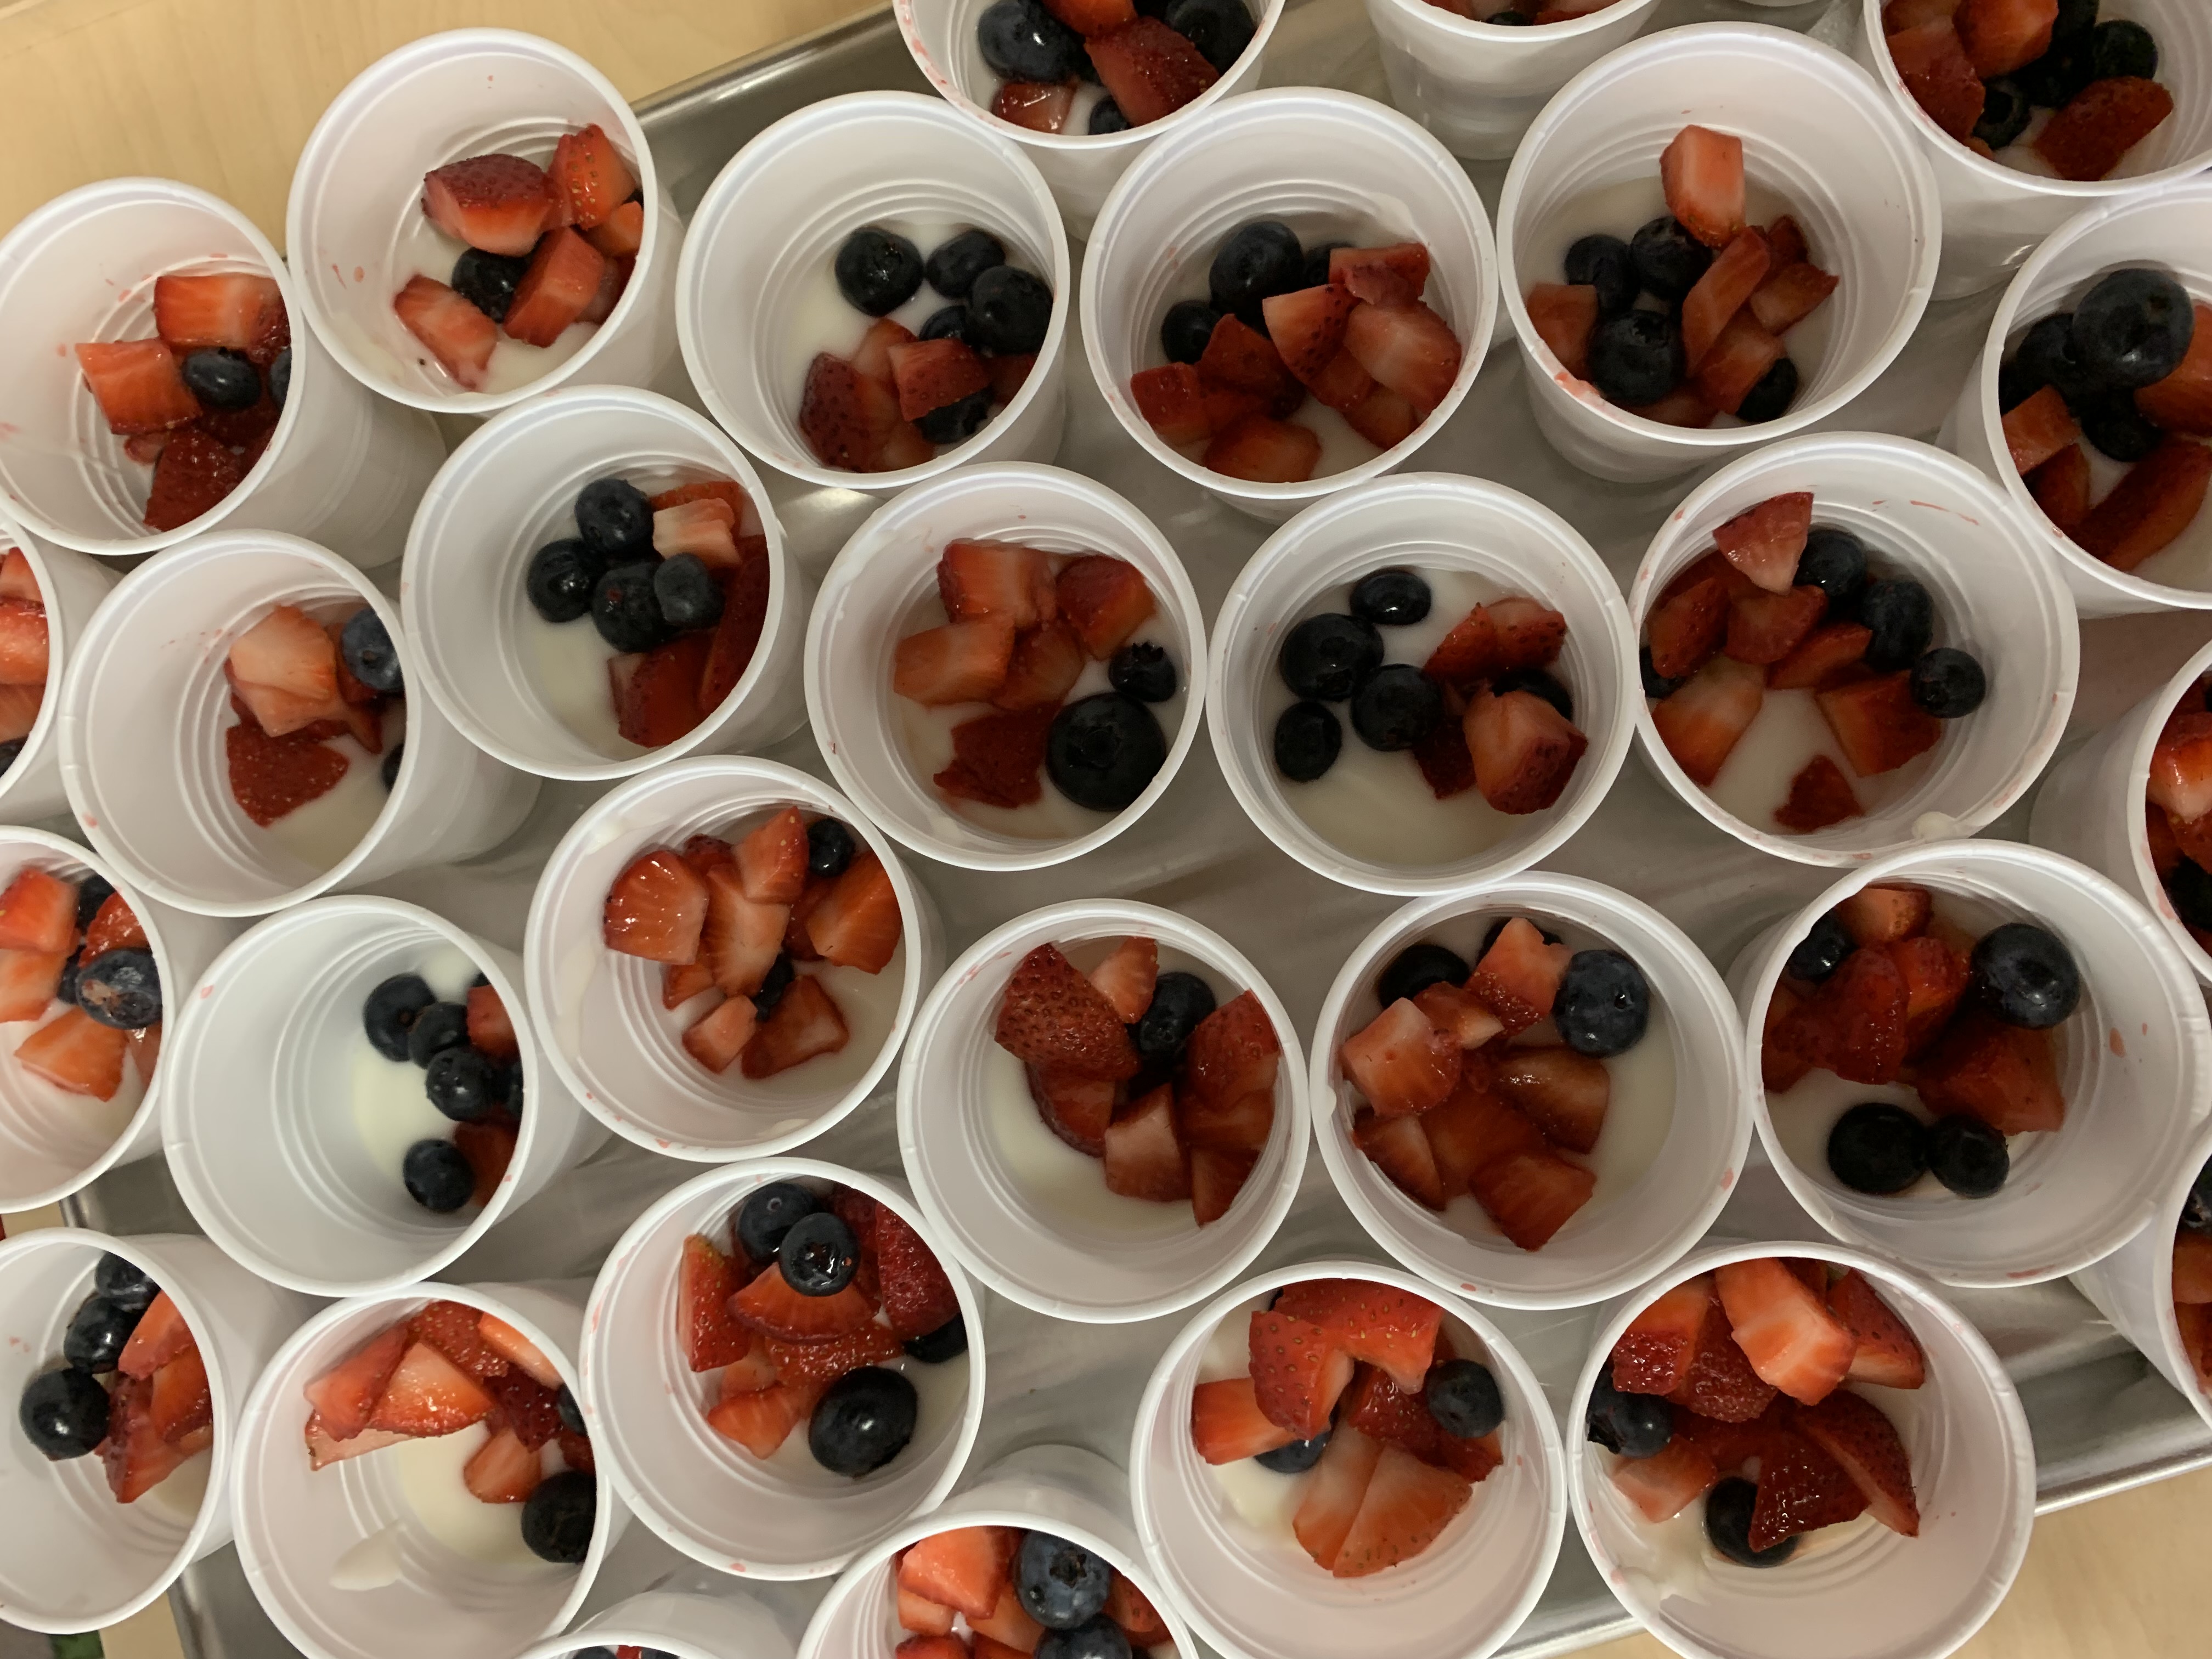 A tray of yogurt parfaits made with strawberries and blueberries.